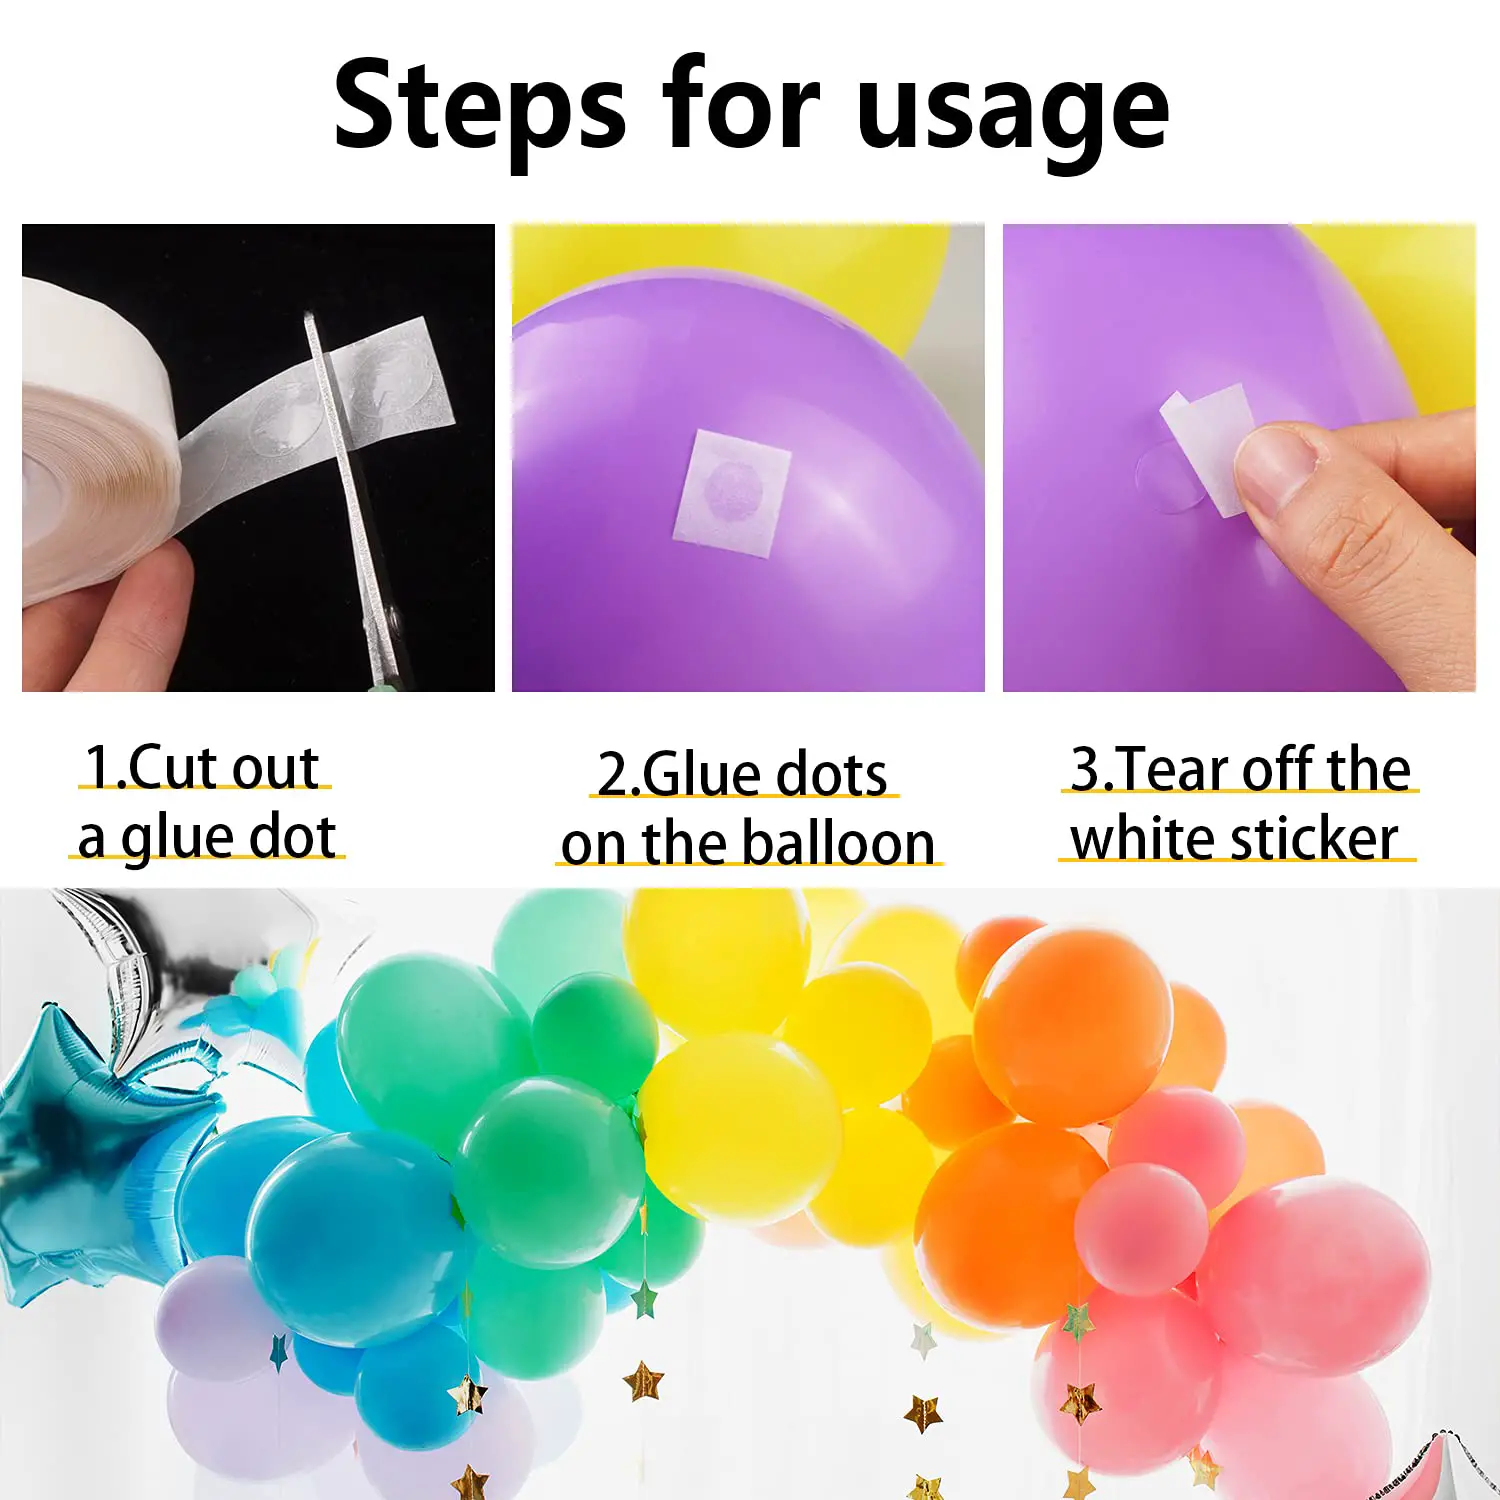 How To Use Glue Dots For Balloons